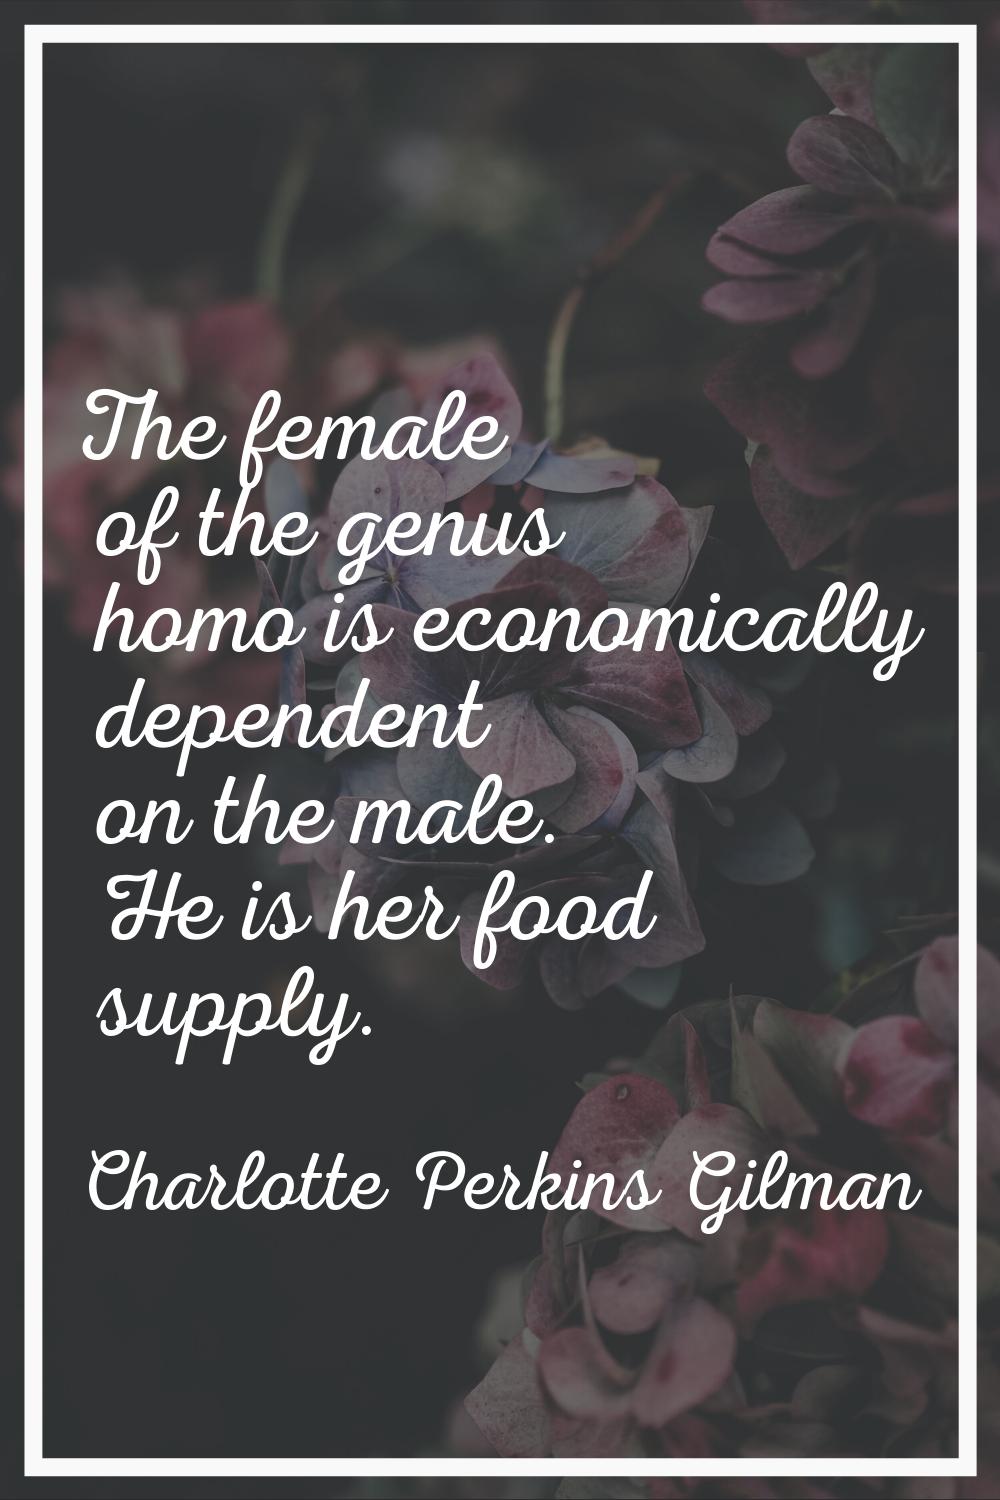 The female of the genus homo is economically dependent on the male. He is her food supply.